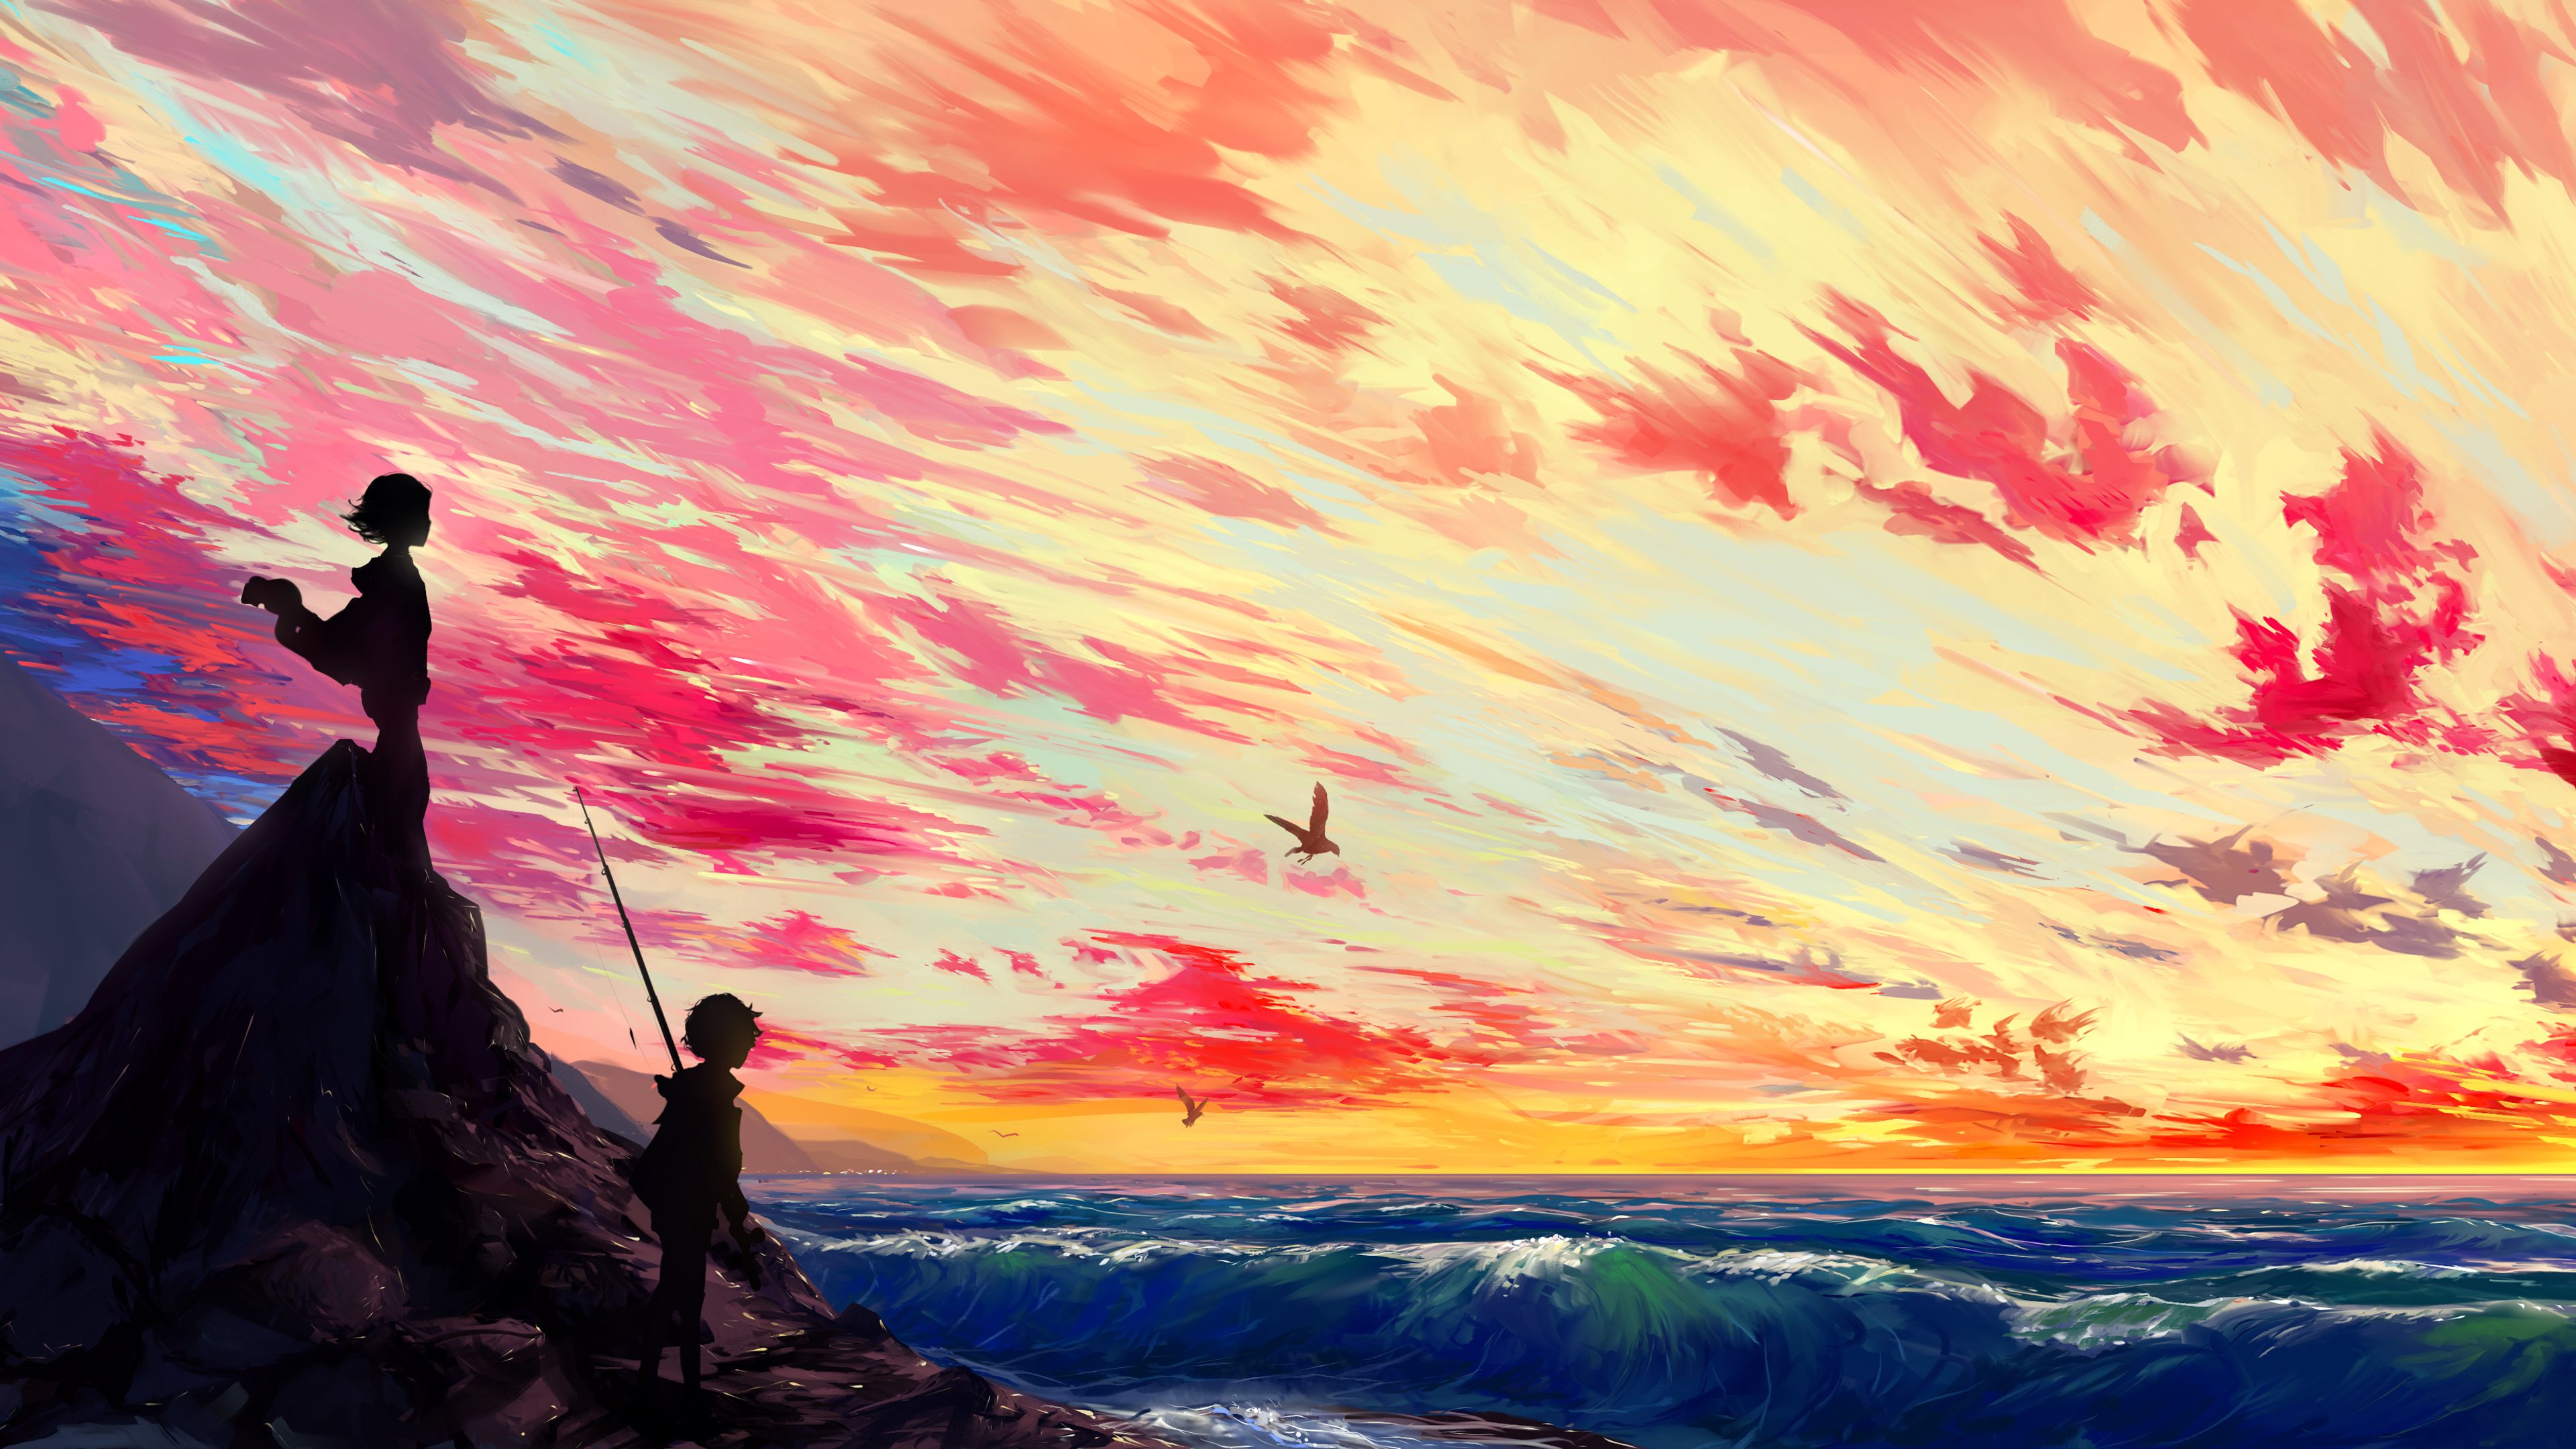 romantic anime landscape painting drawing